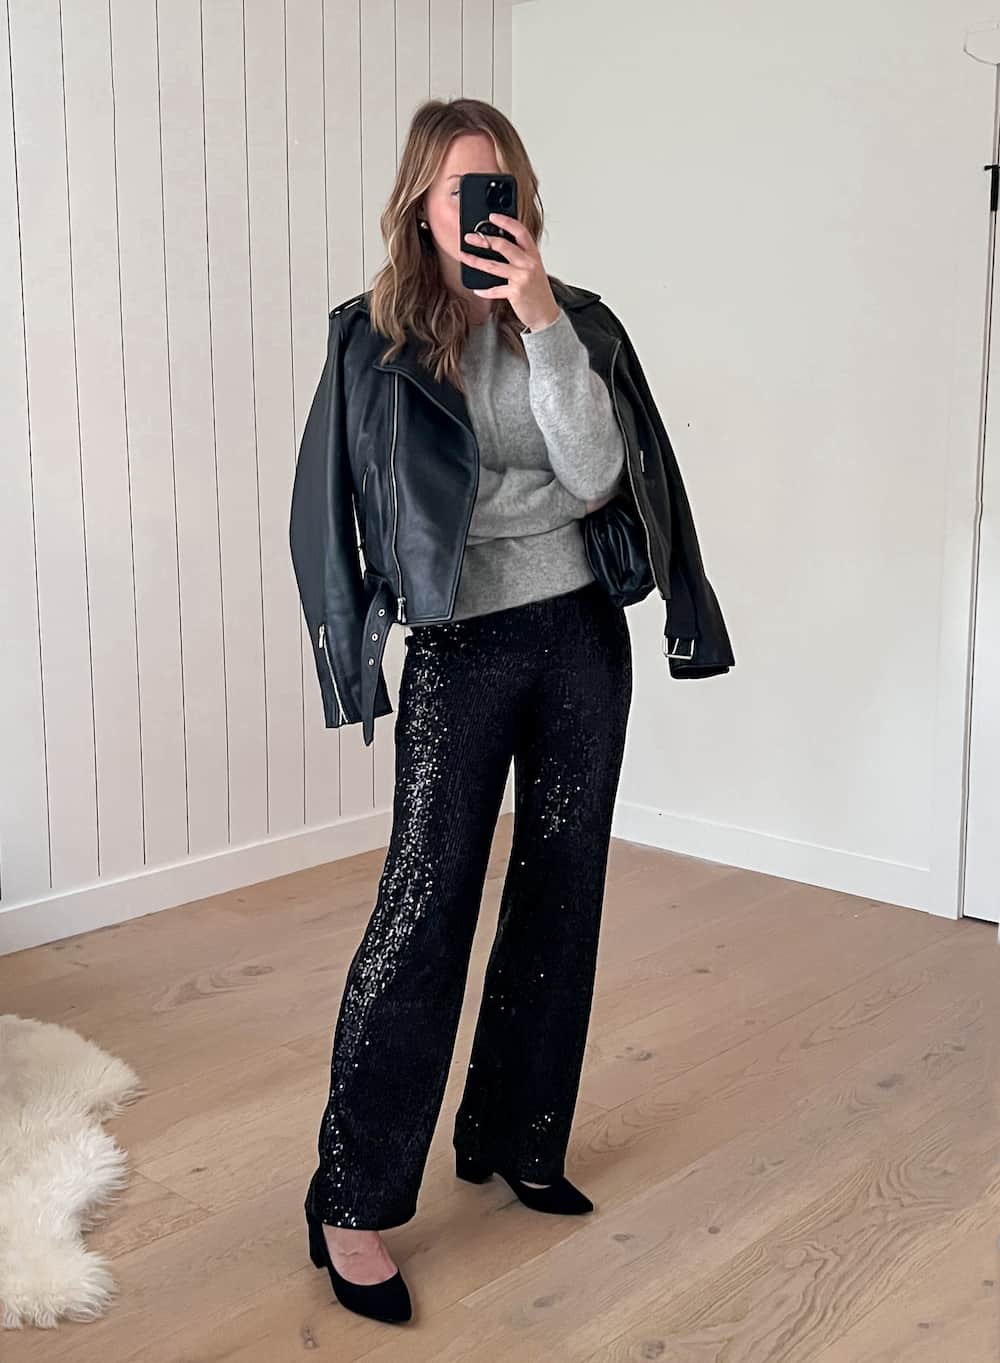 Christal wearing sequin pants, a grey sweater, a black leather jacket and black pumps.